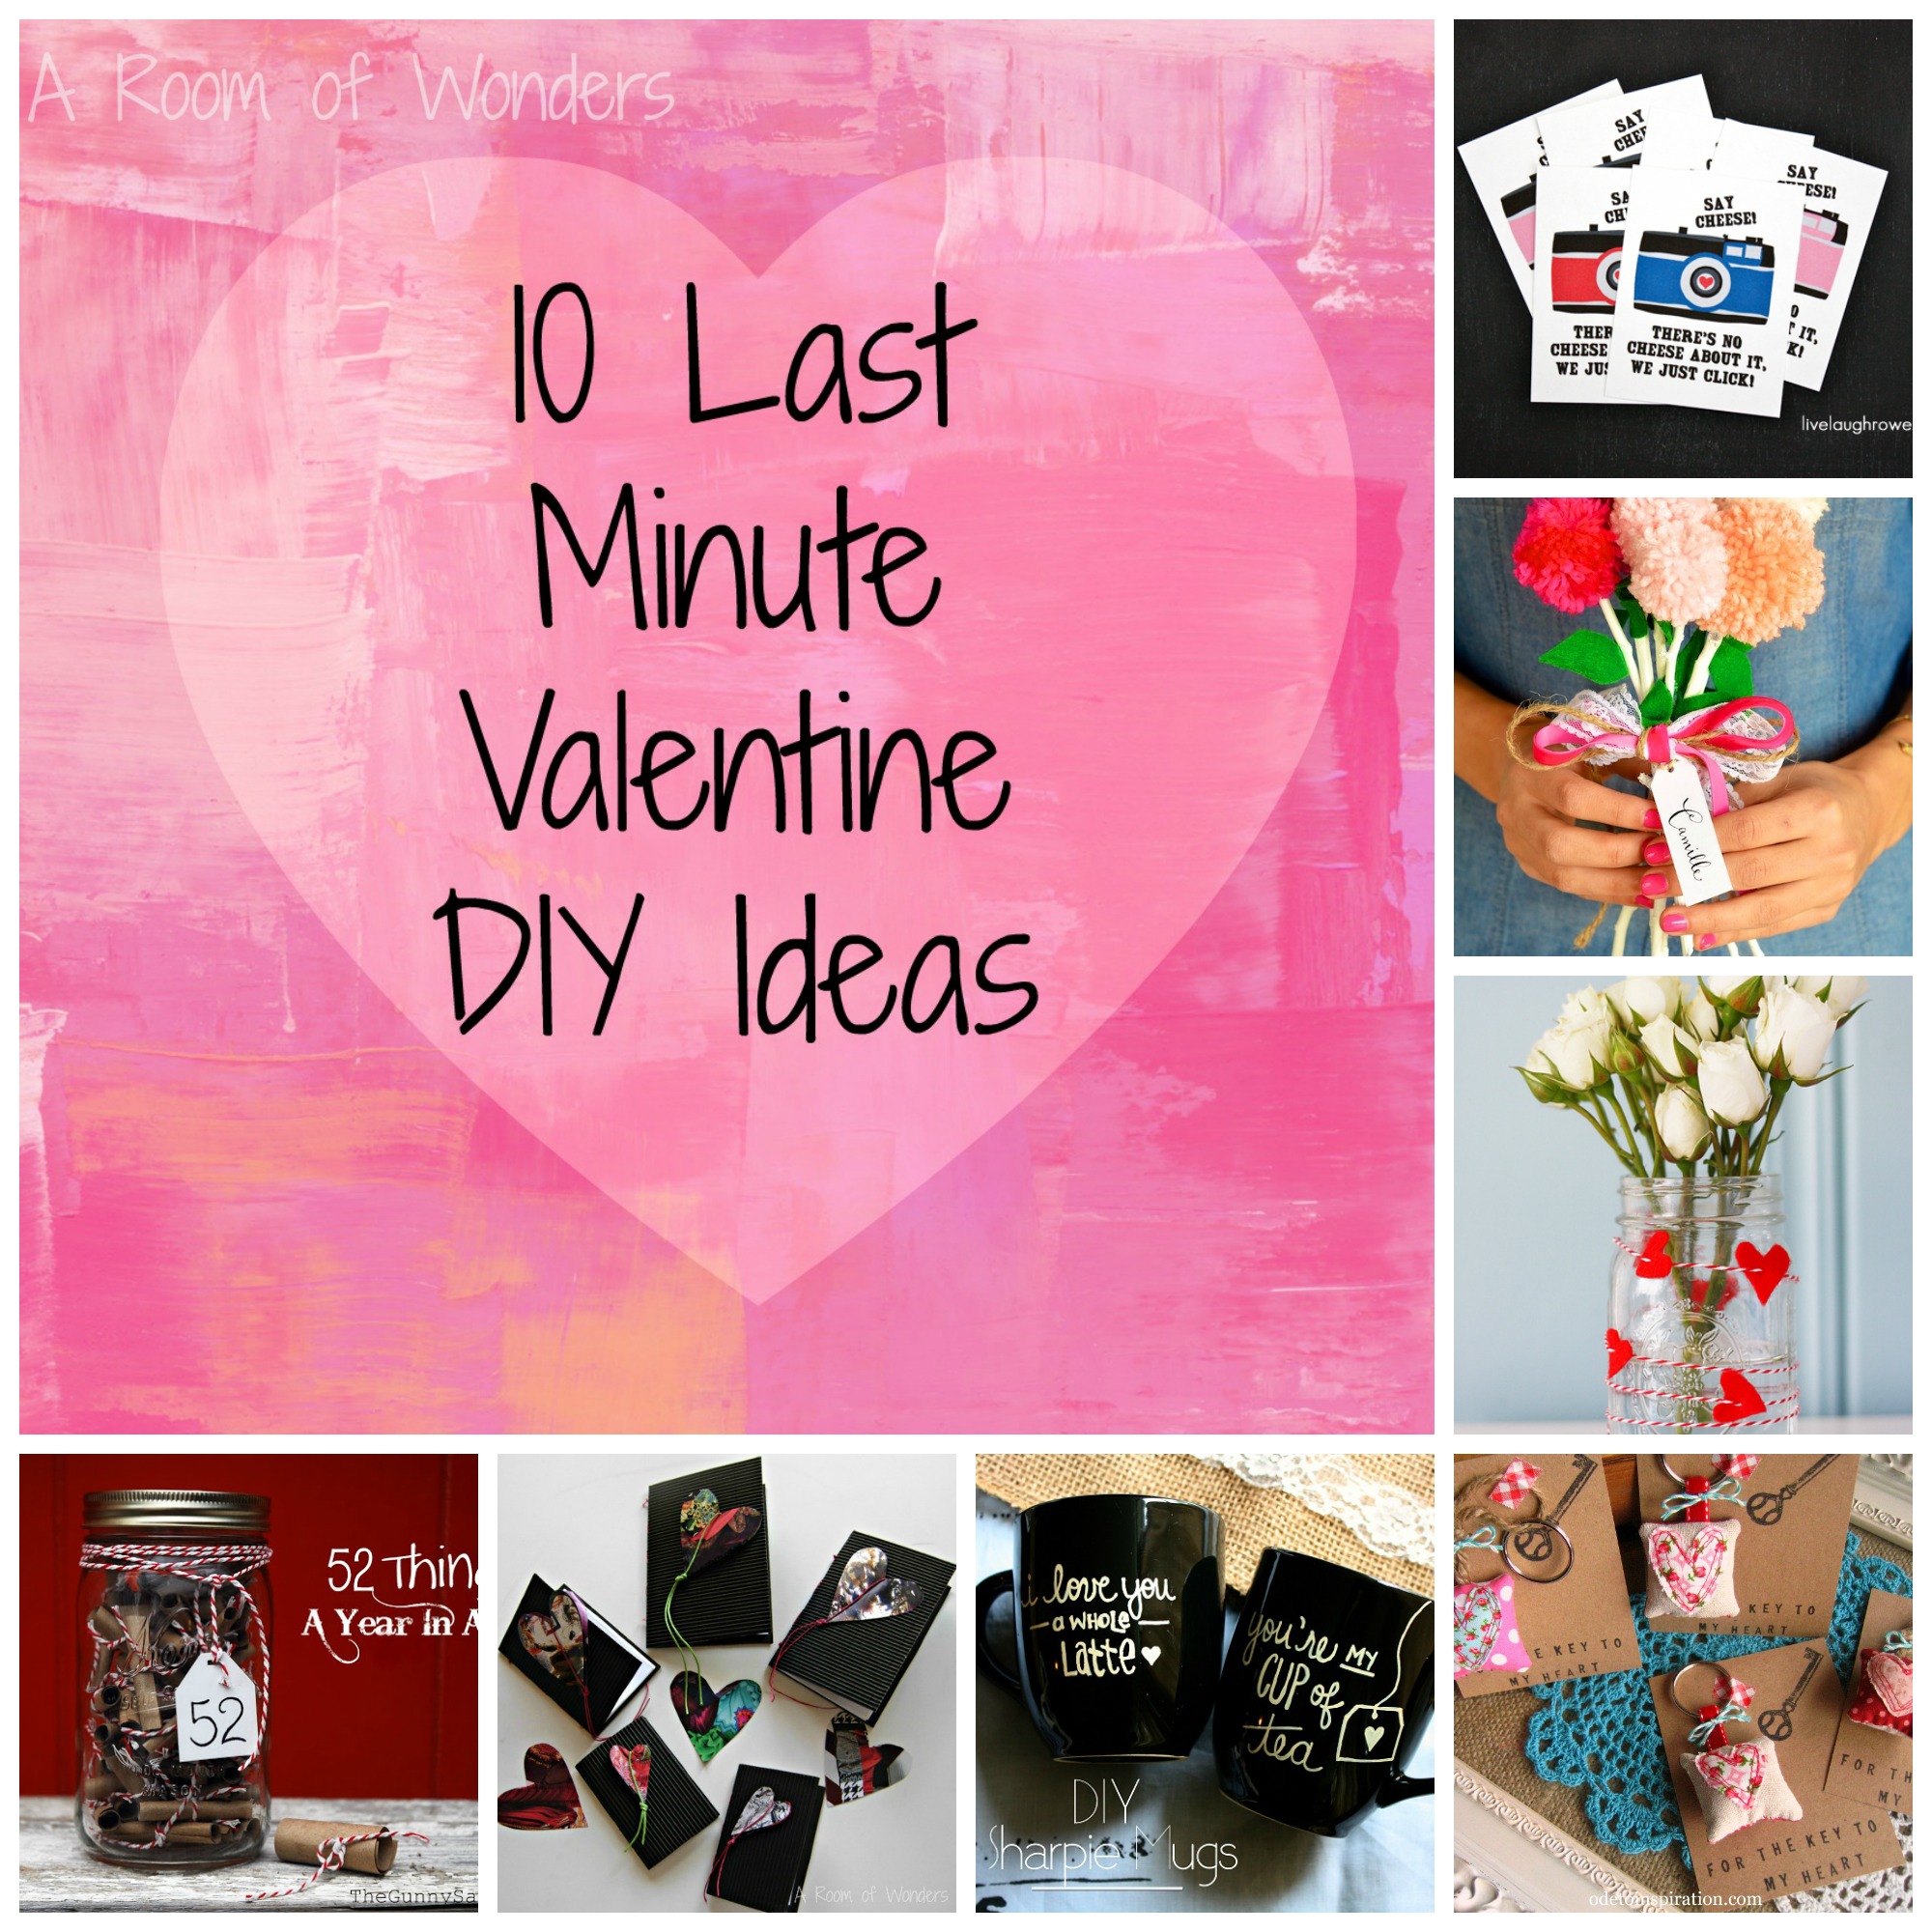 Buy Last Minute Anniversary Gifts For Him | Thoughtful Ideas